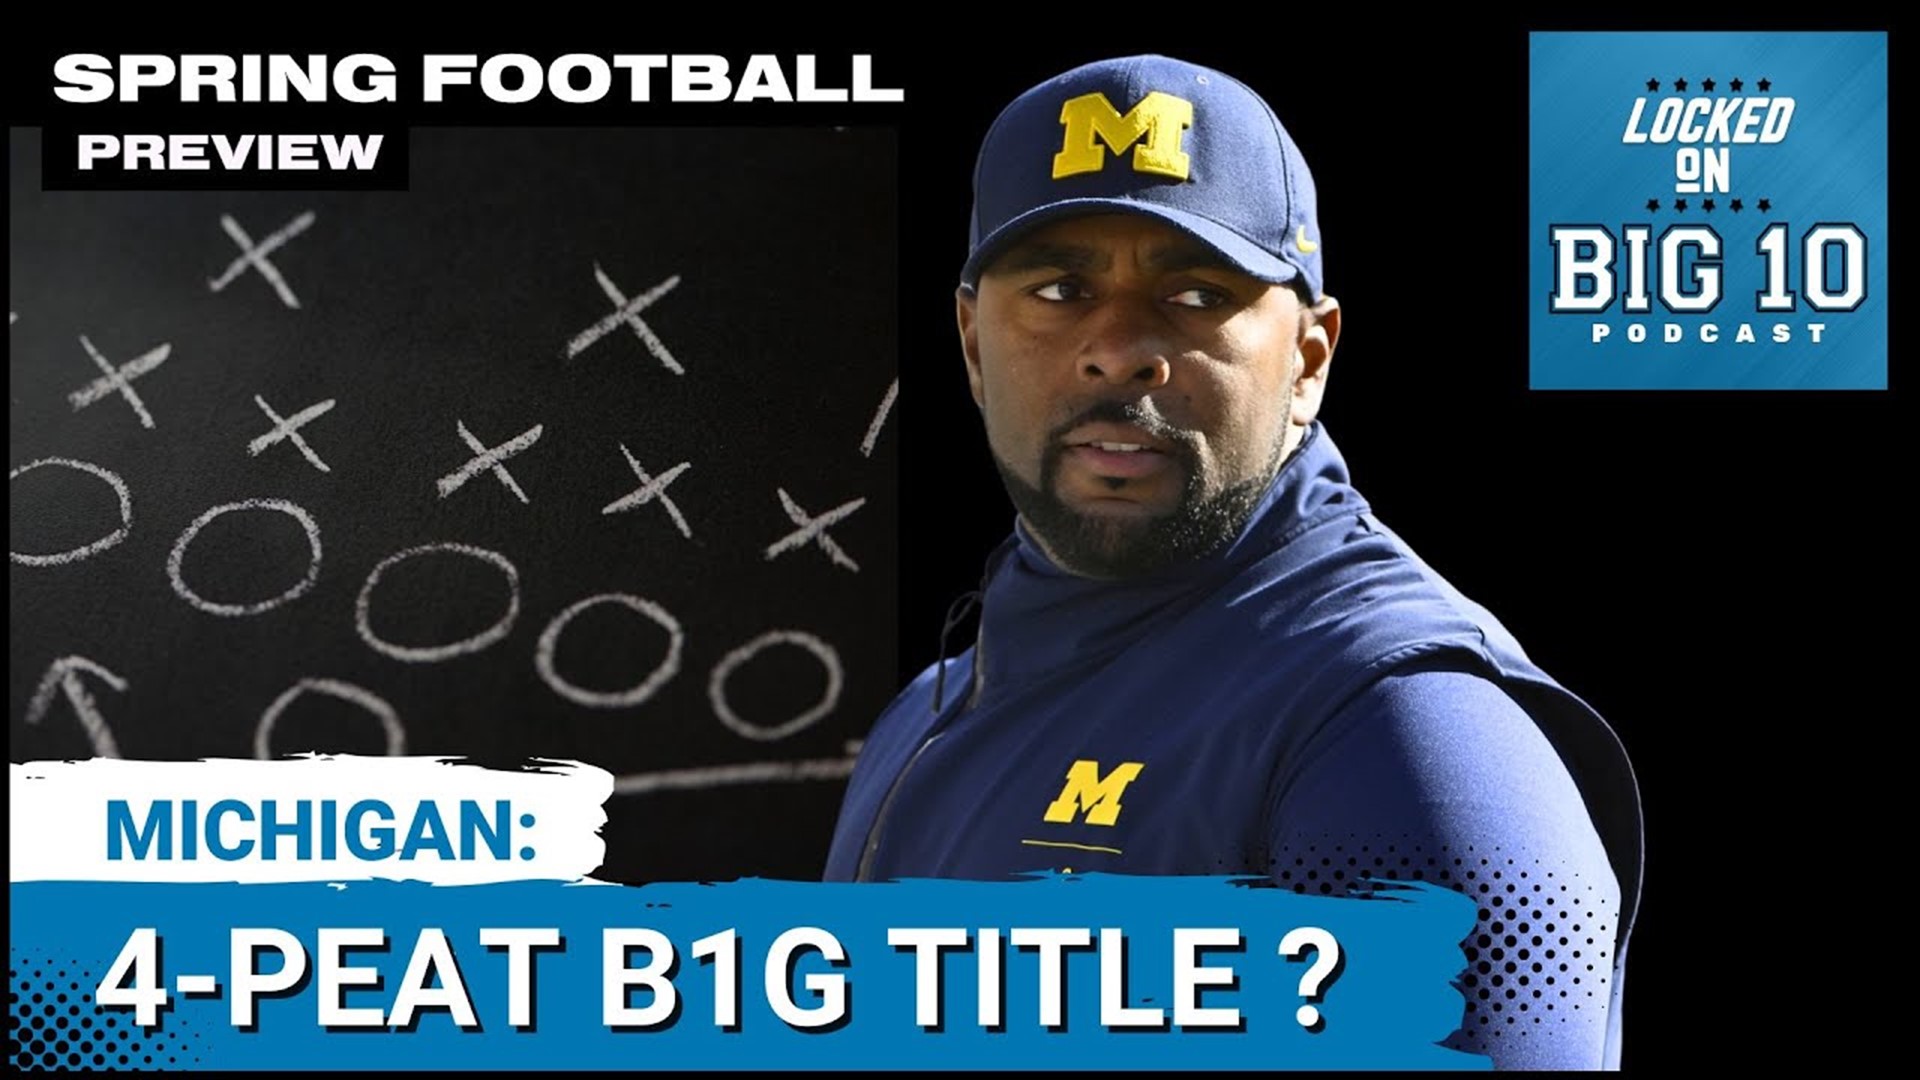 SPRING PREVIEW: Can Michigan Wolverines Win 4th Straight B1G Title?